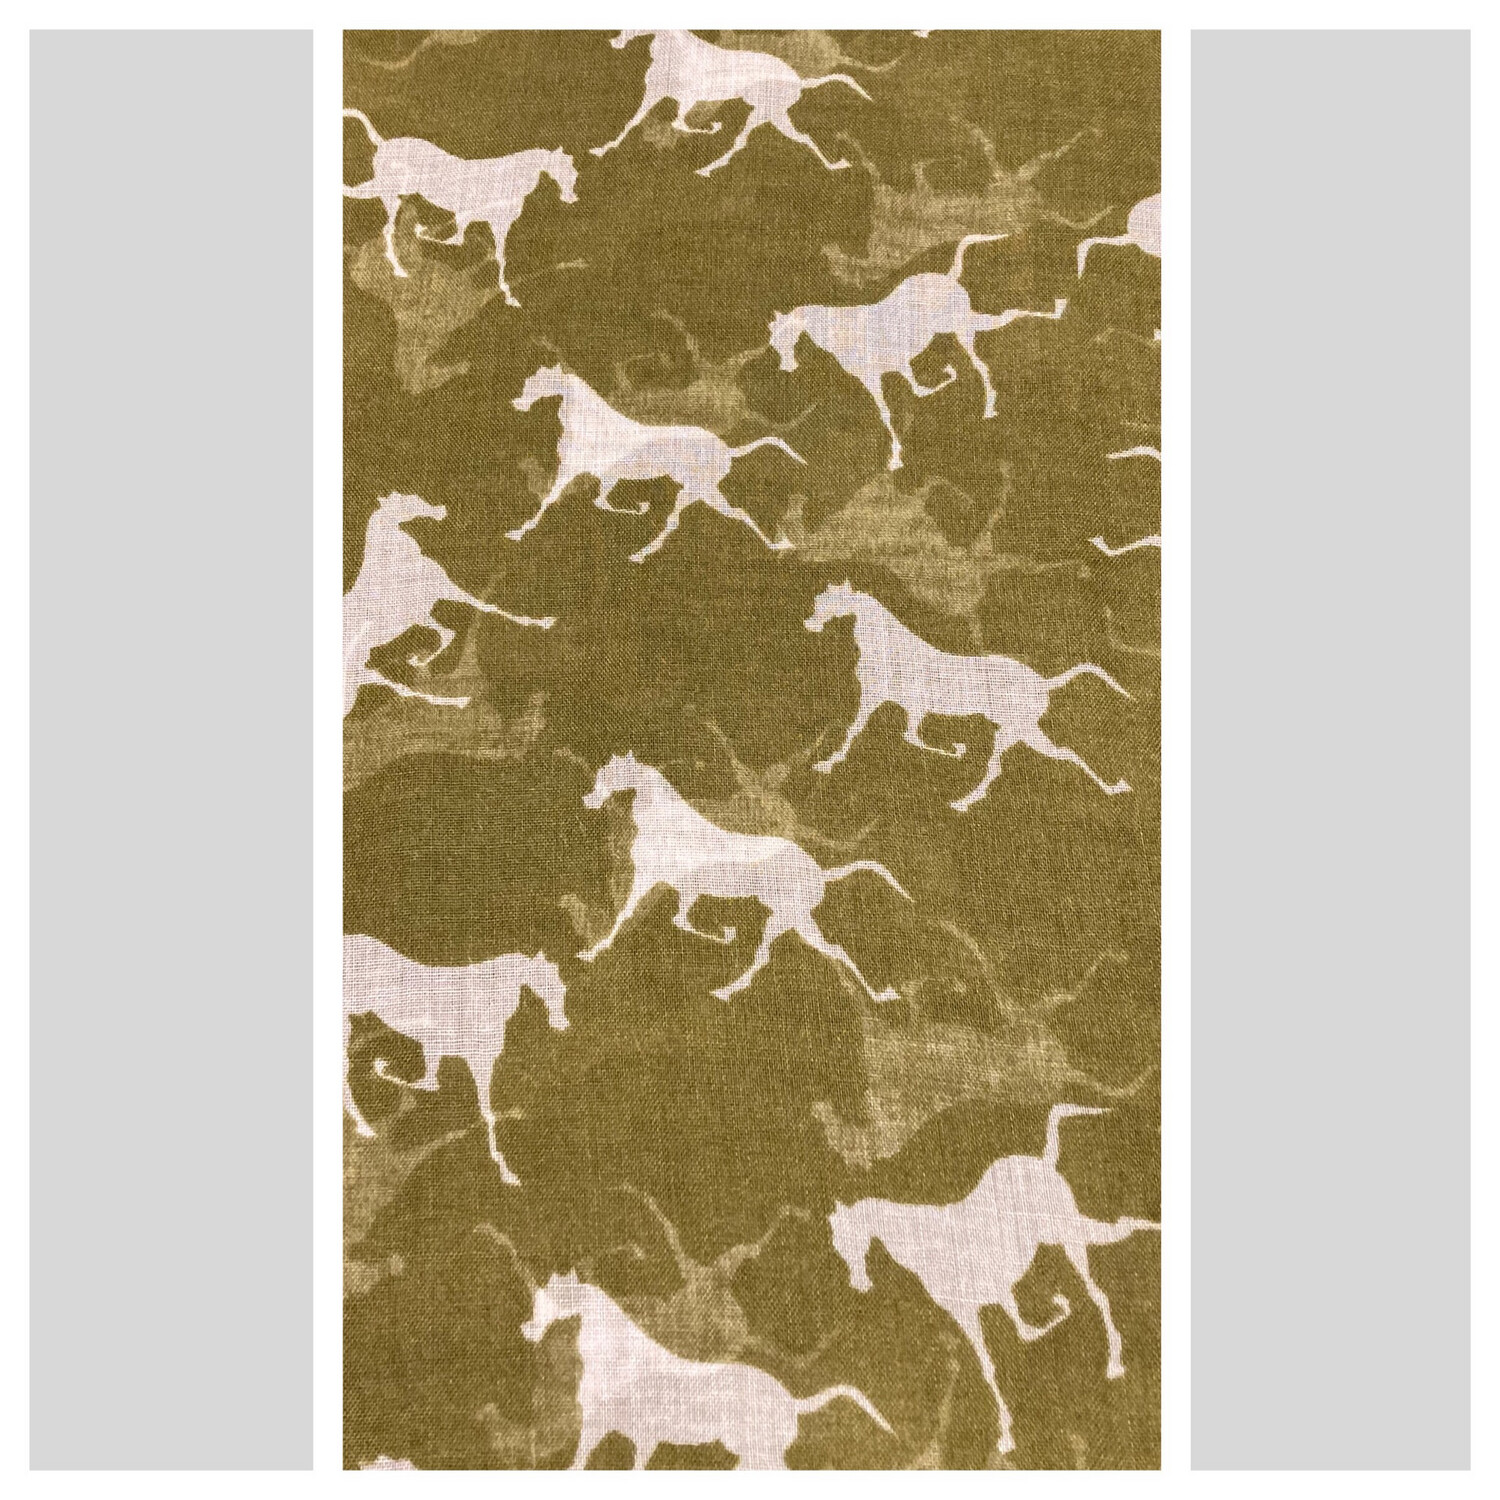 Horse Scarf - Olive